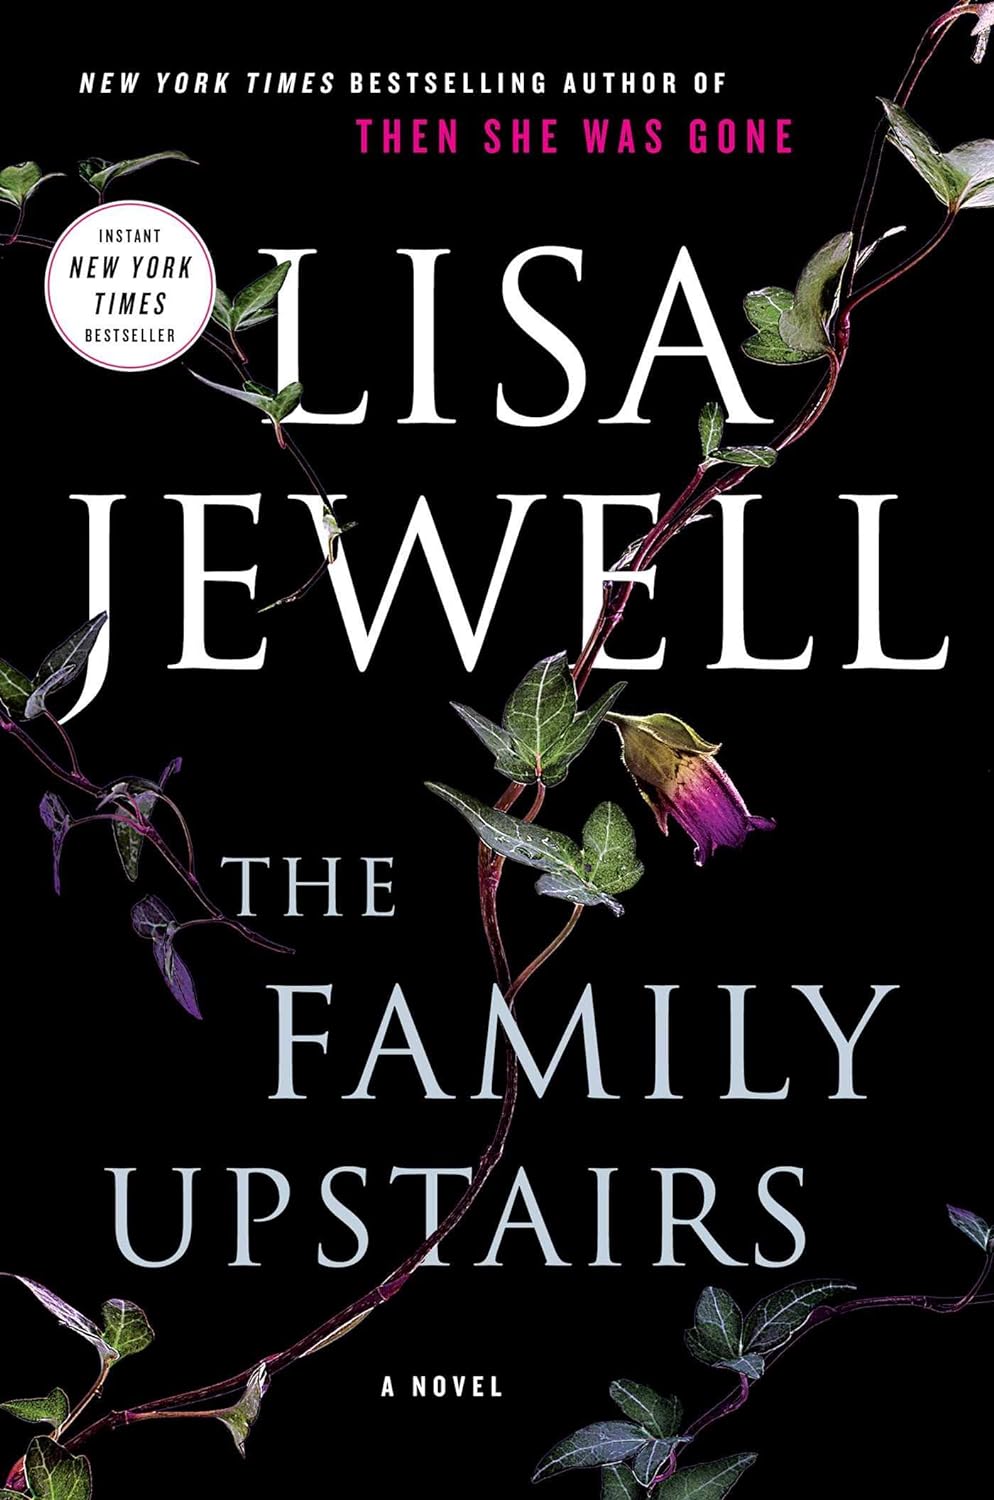 Image for "The Family Upstairs"